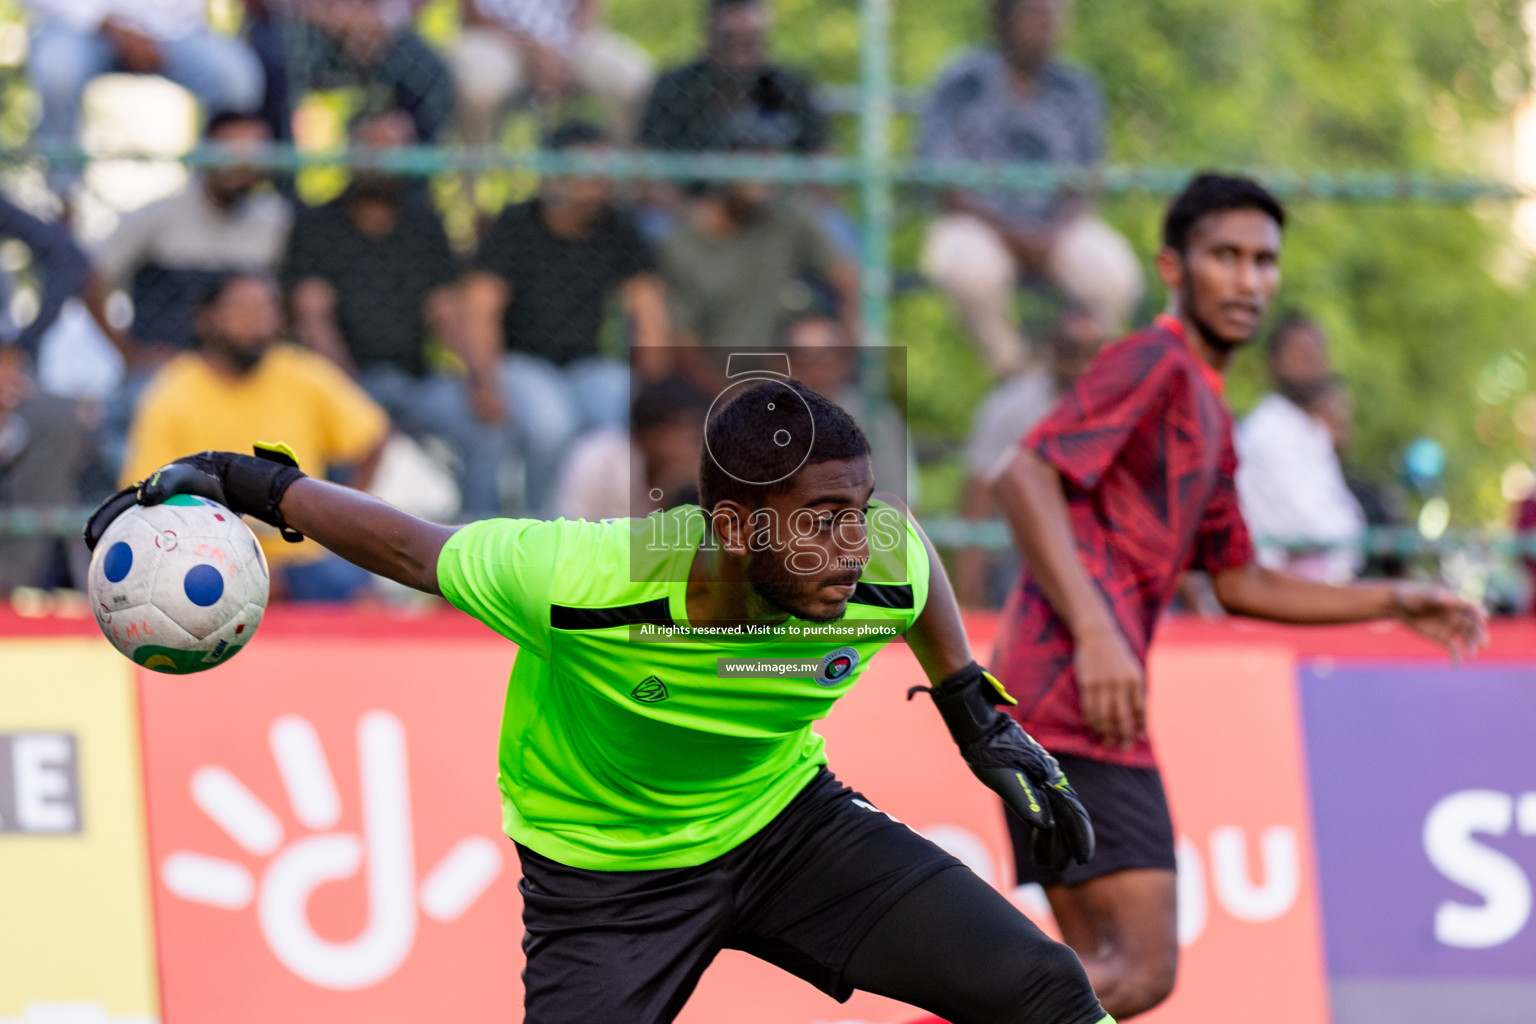 MACL vs Police Club in Club Maldives Cup 2023 held in Hulhumale, Maldives, on Saturday, 22nd July 2023. Photos: Hassan Simah / images.mv